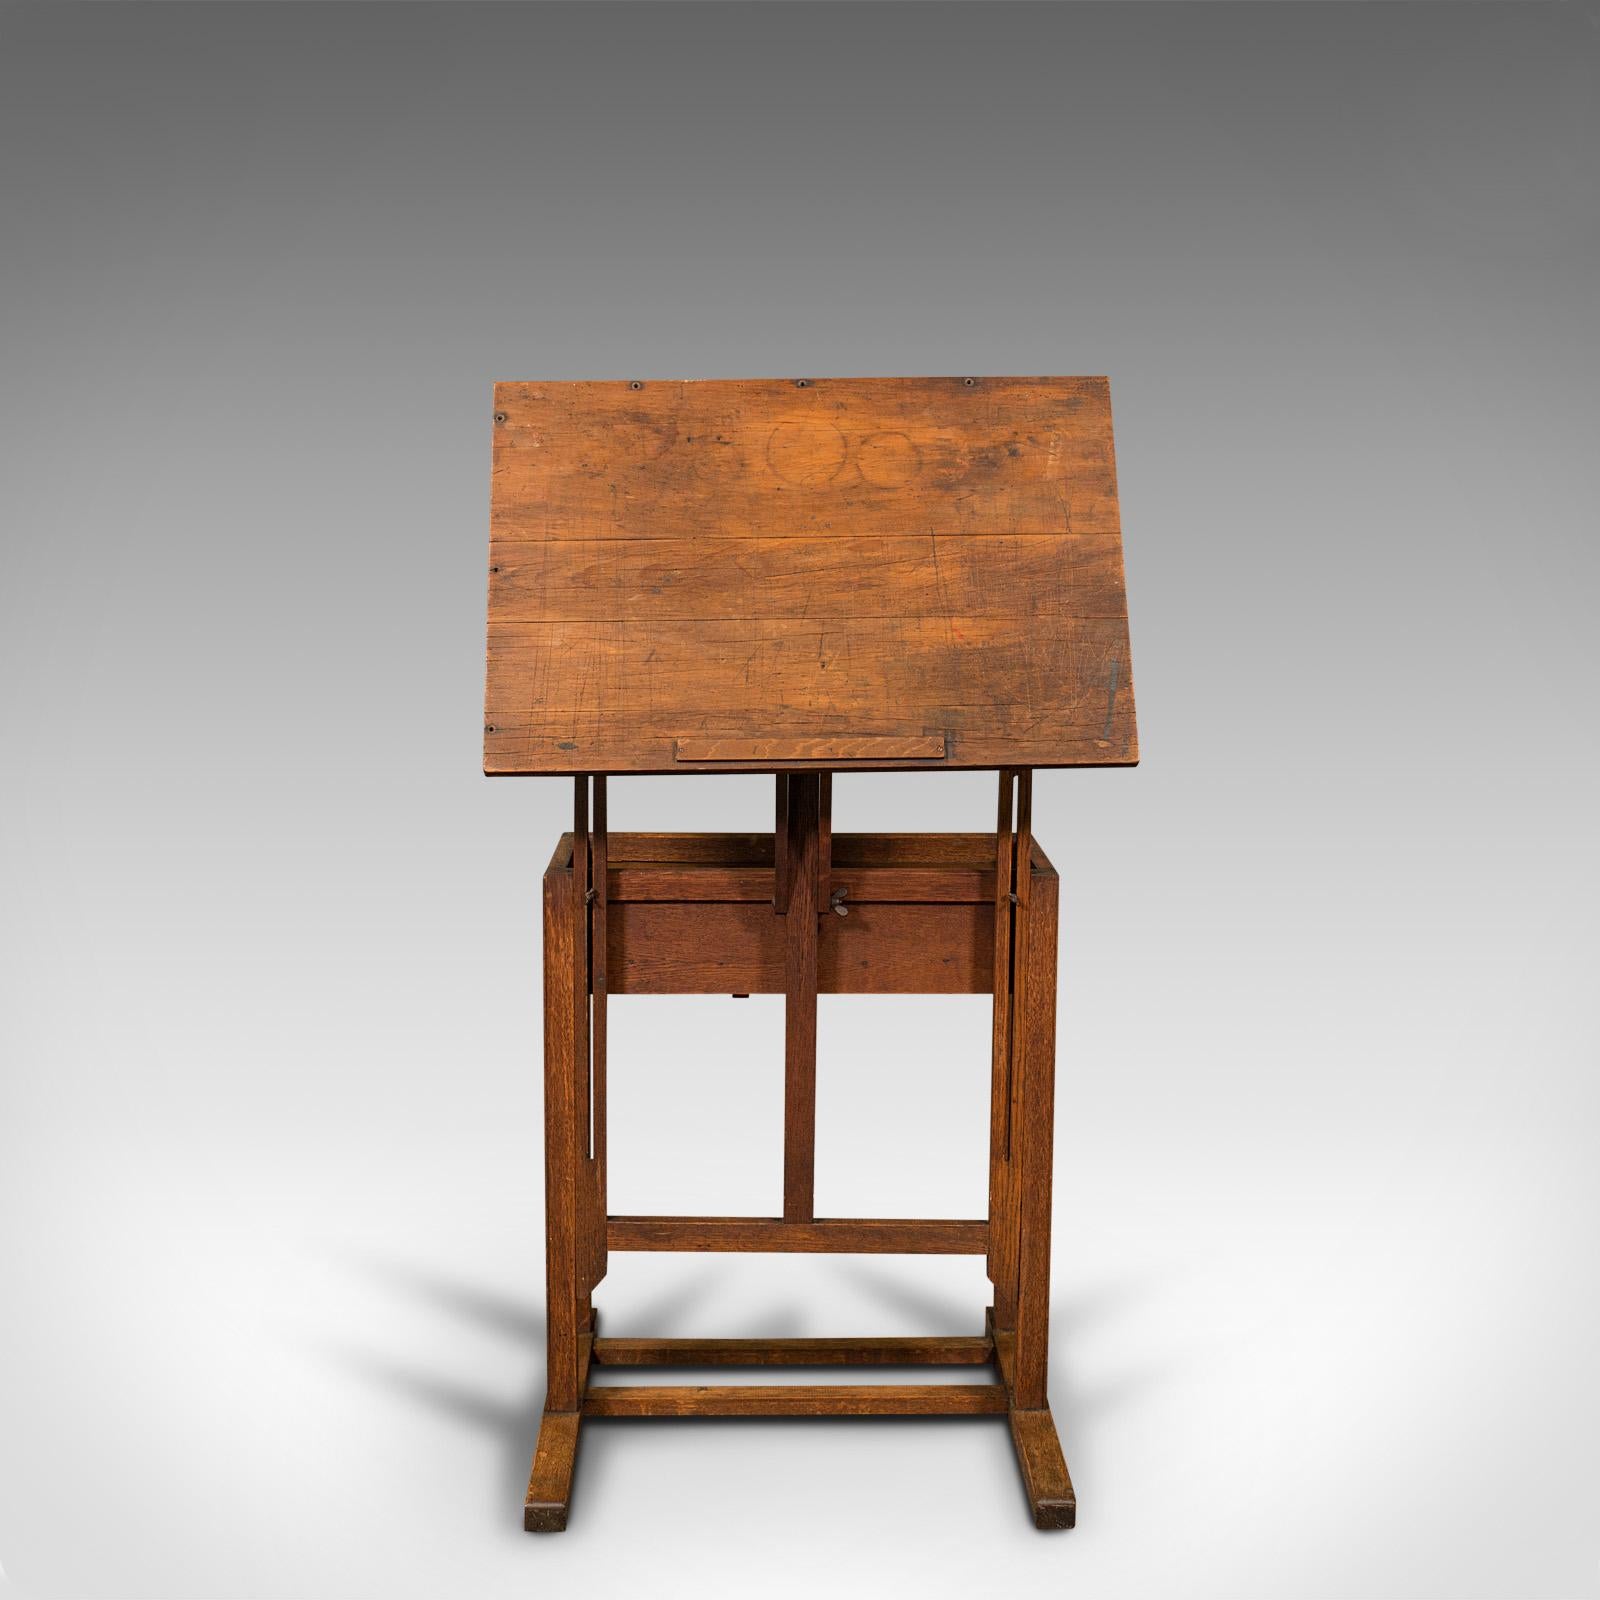 This is an antique artist's easel. An English, oak adjustable draughtsman's rest or lectern, dating to the Edwardian period, circa 1910.

Fascinating Edwardian easel for the artist or orator.
Displaying a desirable aged patina and in good